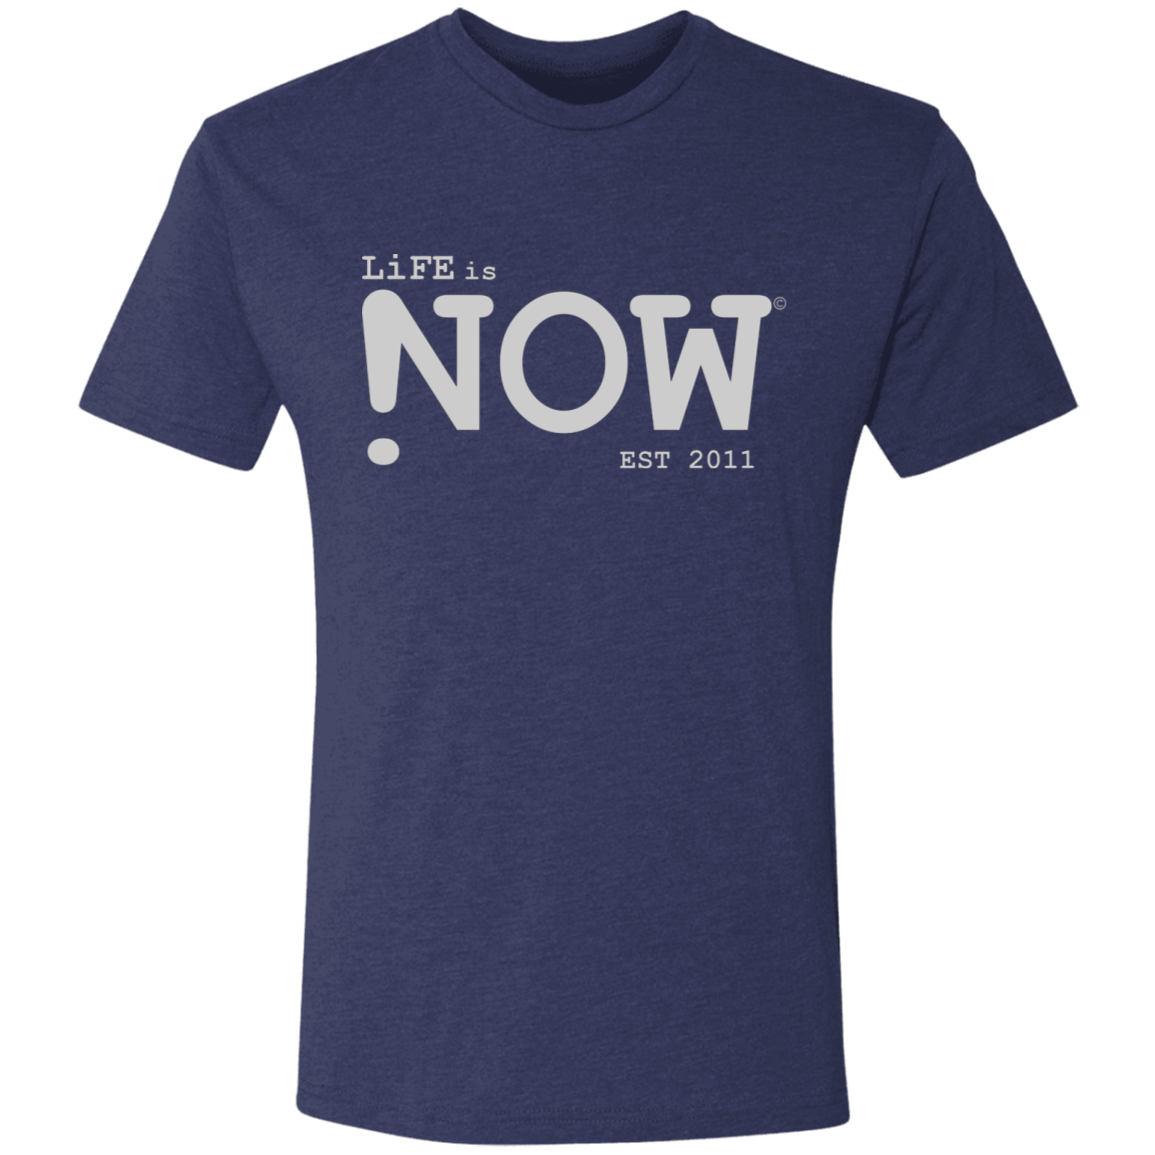 LiFE is NOW...Men's Triblend T-Shirt